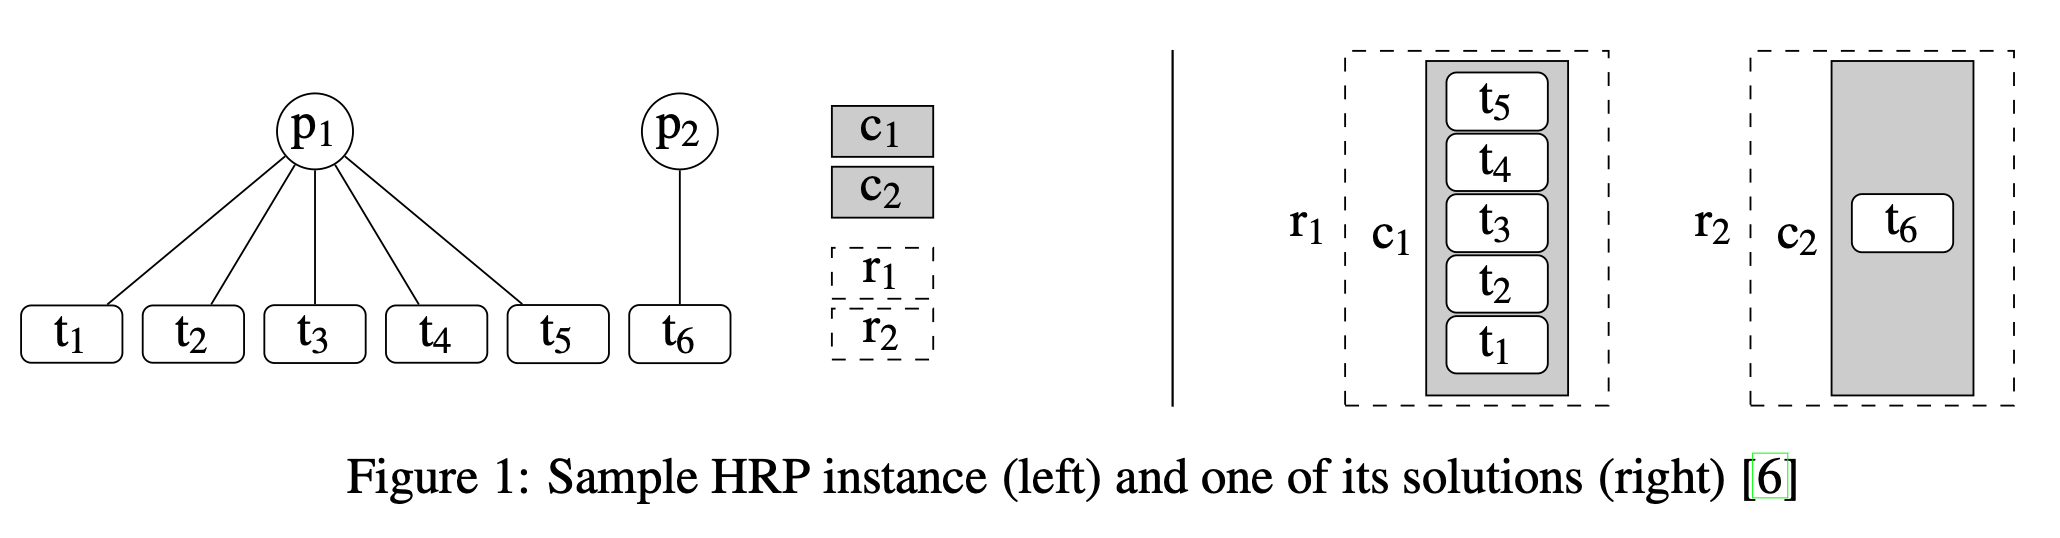 Inductive Learning of Declarative Domain-Specific Heuristics for ASP